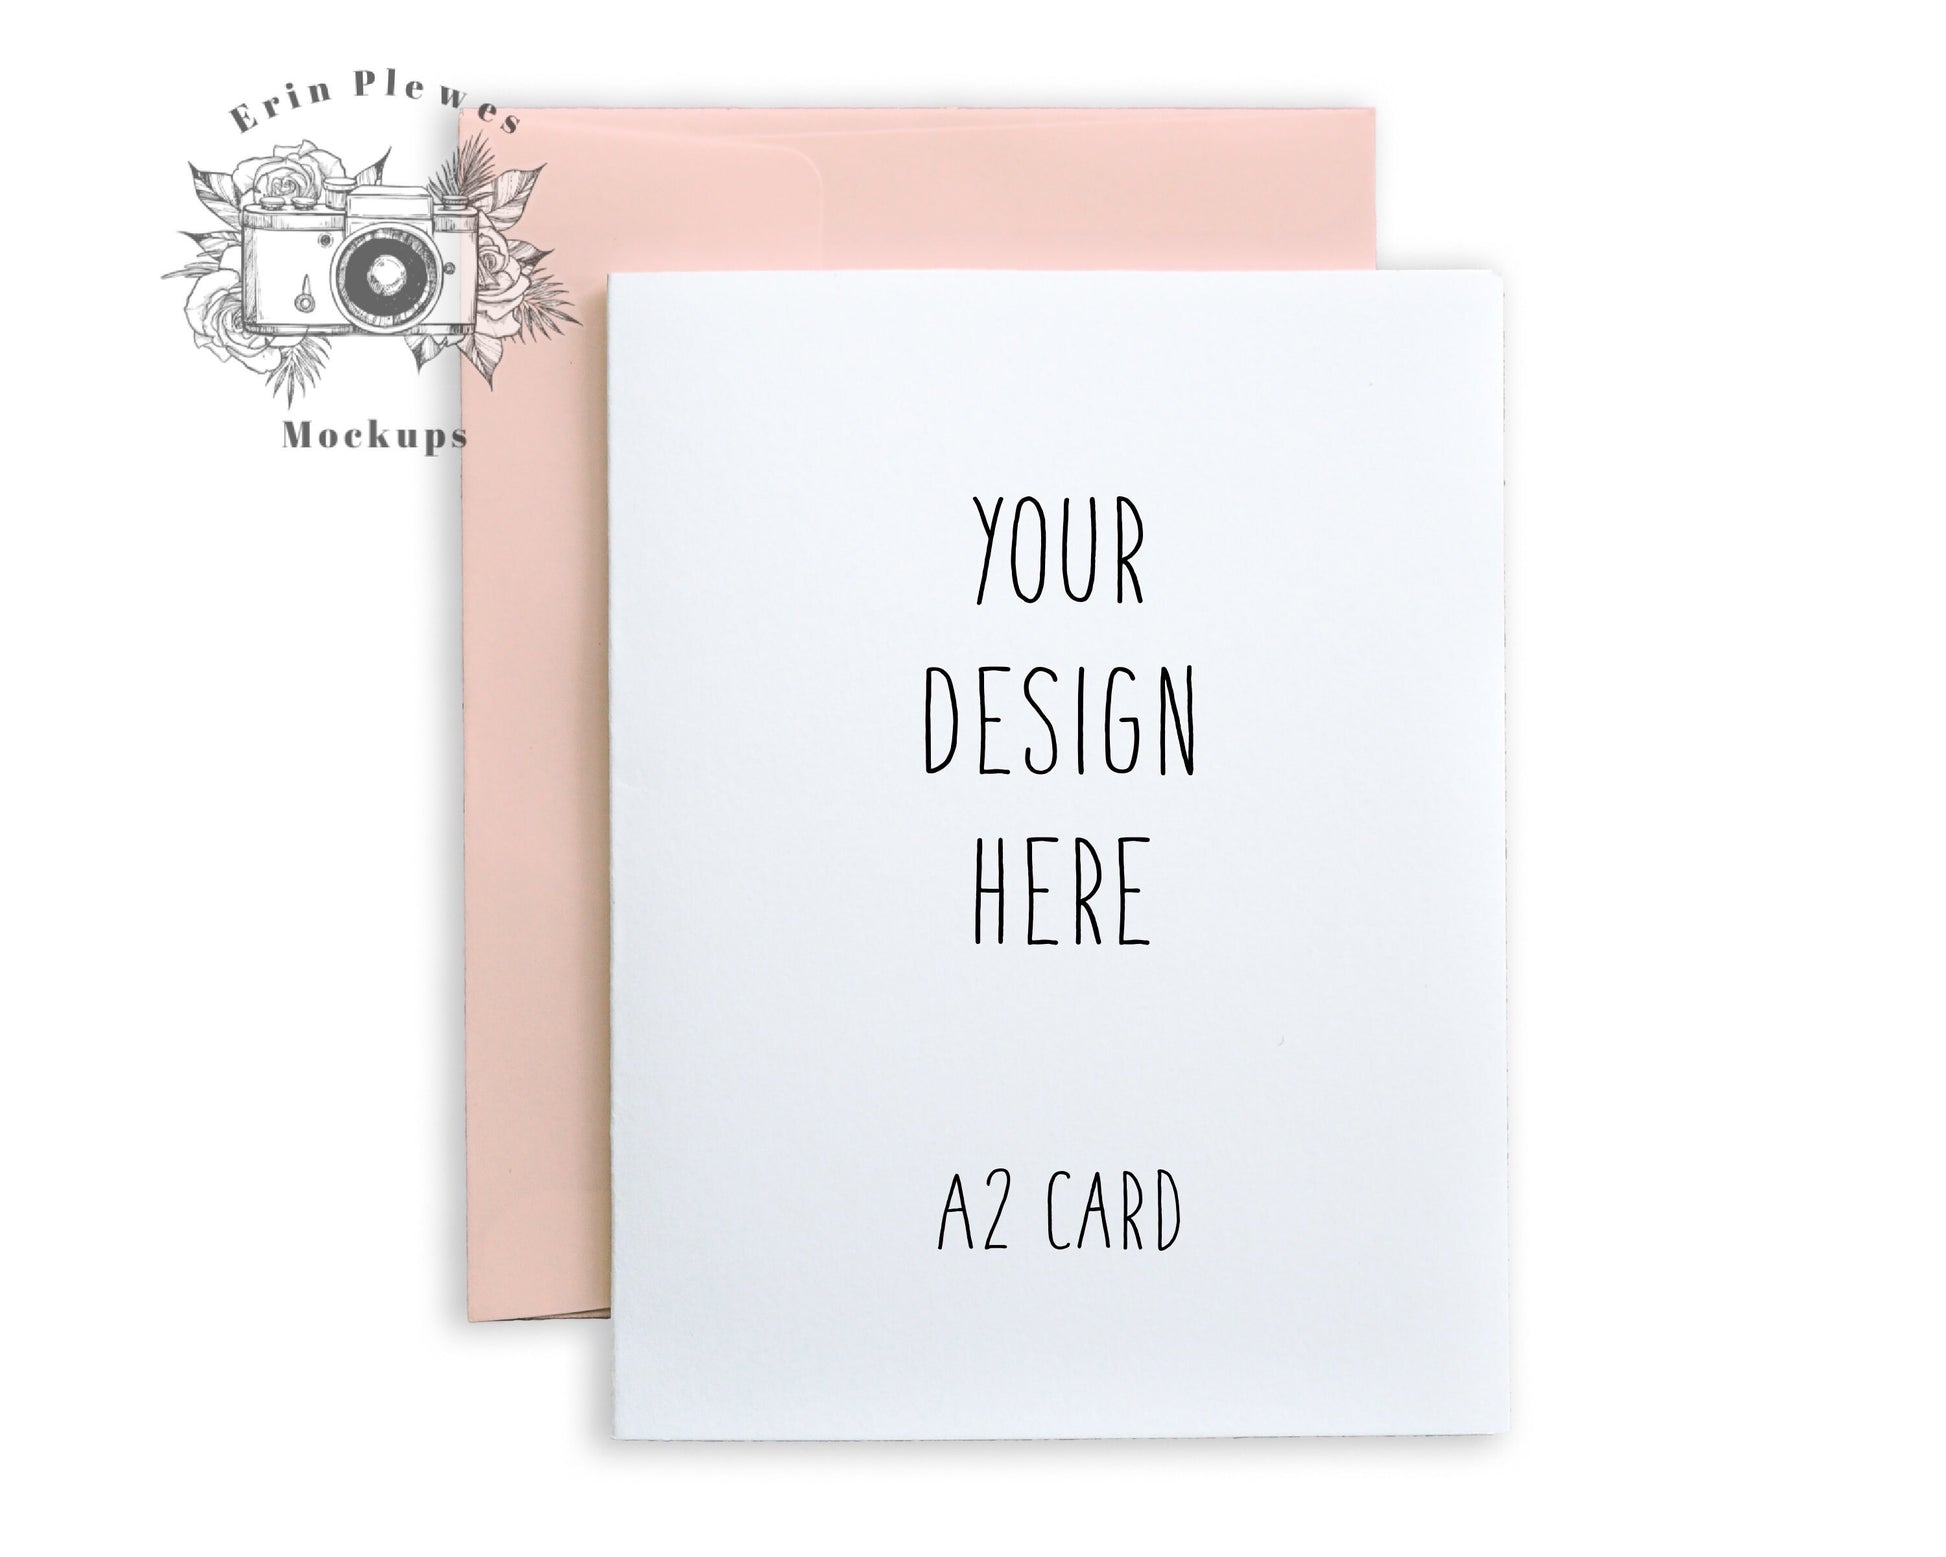 A2 card mockup with pink envelope PNG, Invitation mock up with white background,  Jpeg PNG Instant Digital Download Template